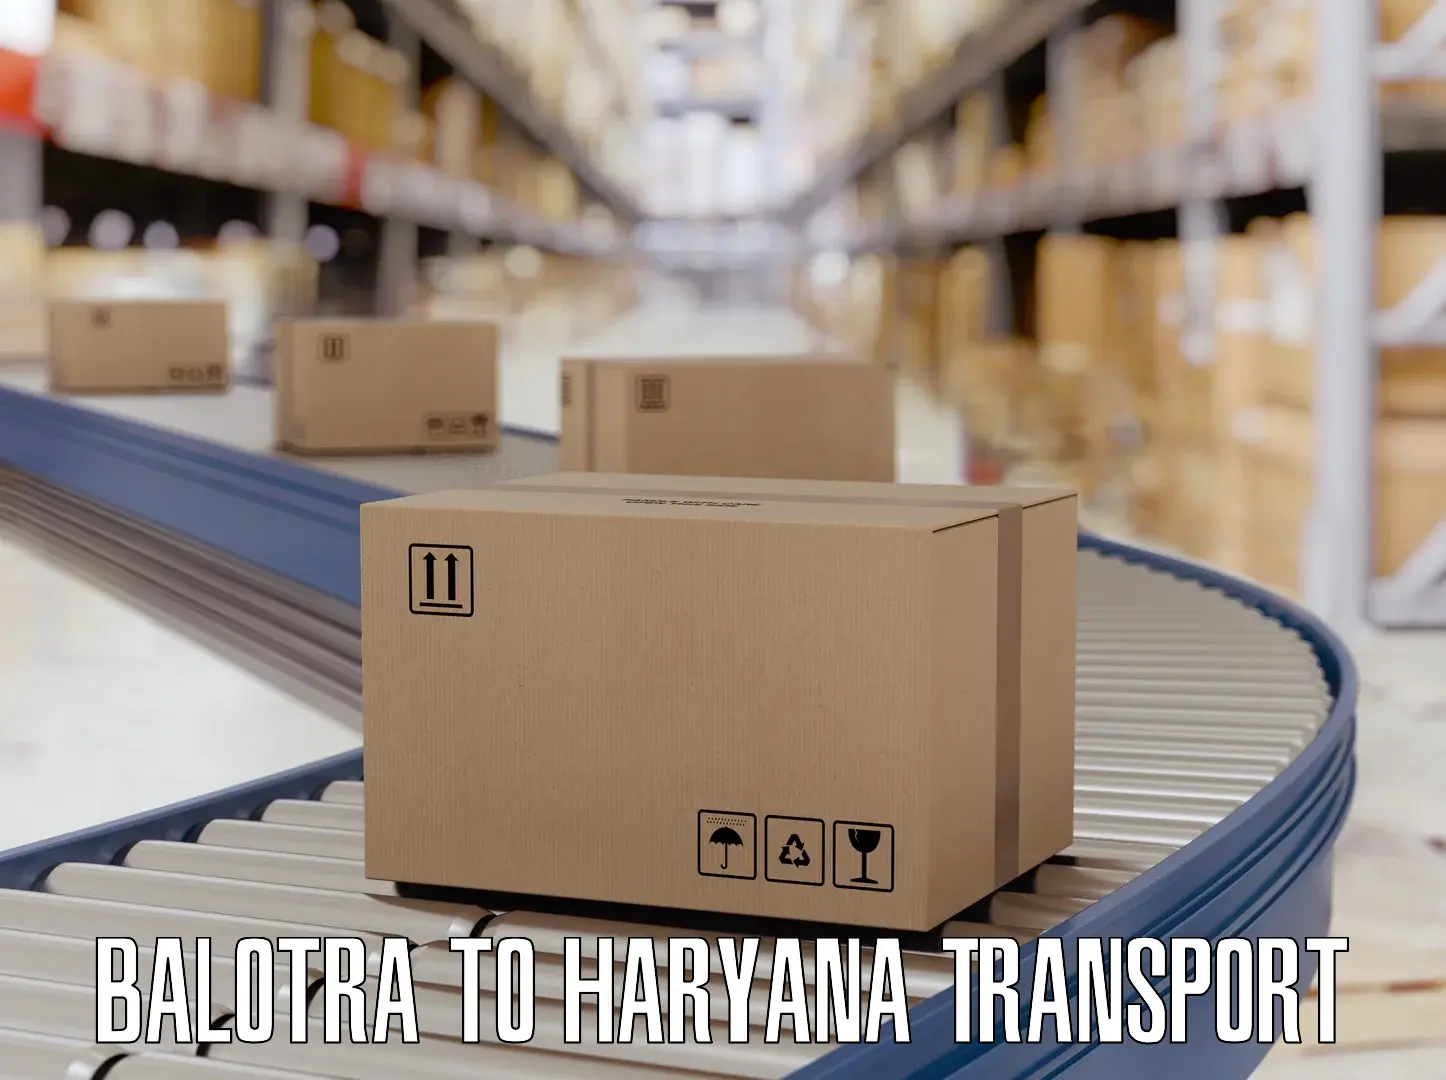 Parcel transport services Balotra to Haryana